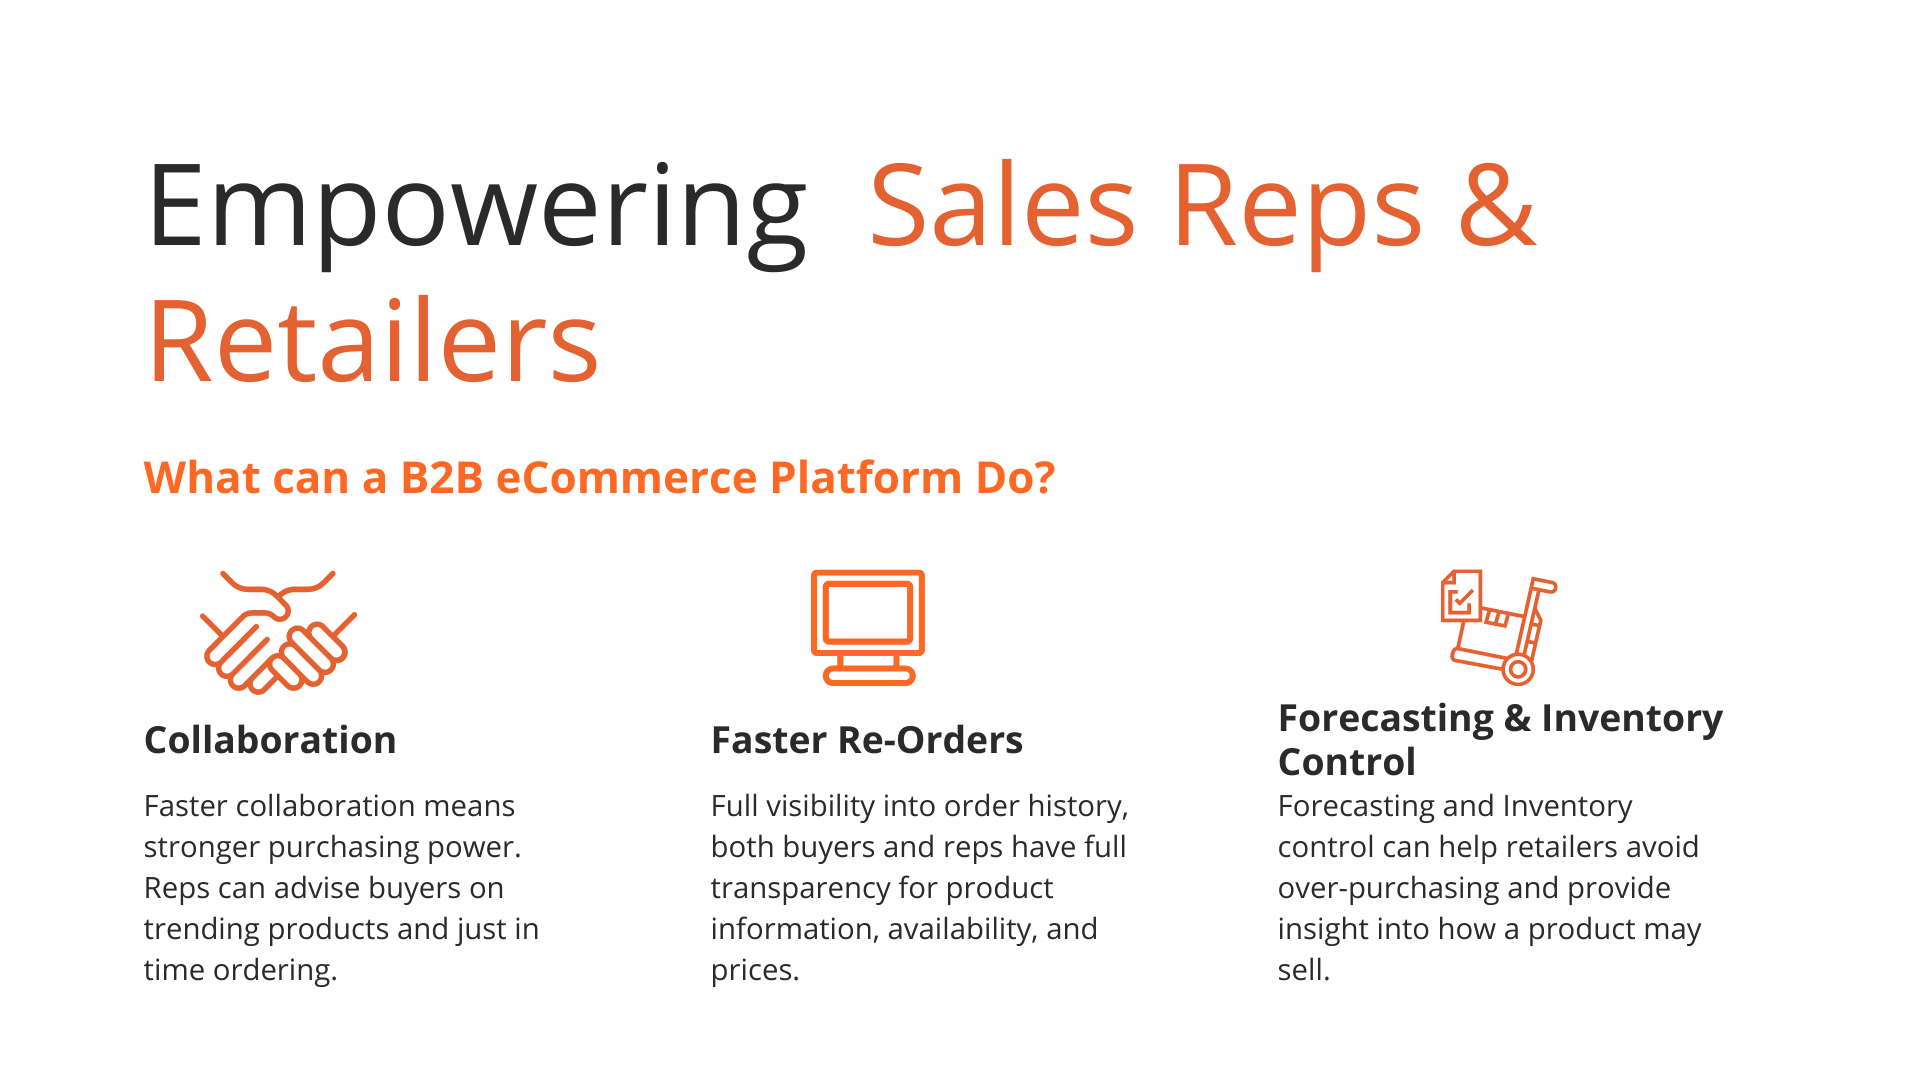 Empowering Sales Reps & Retailers: A visual representation of strategies to boost sales effectiveness and enhance retail performance.